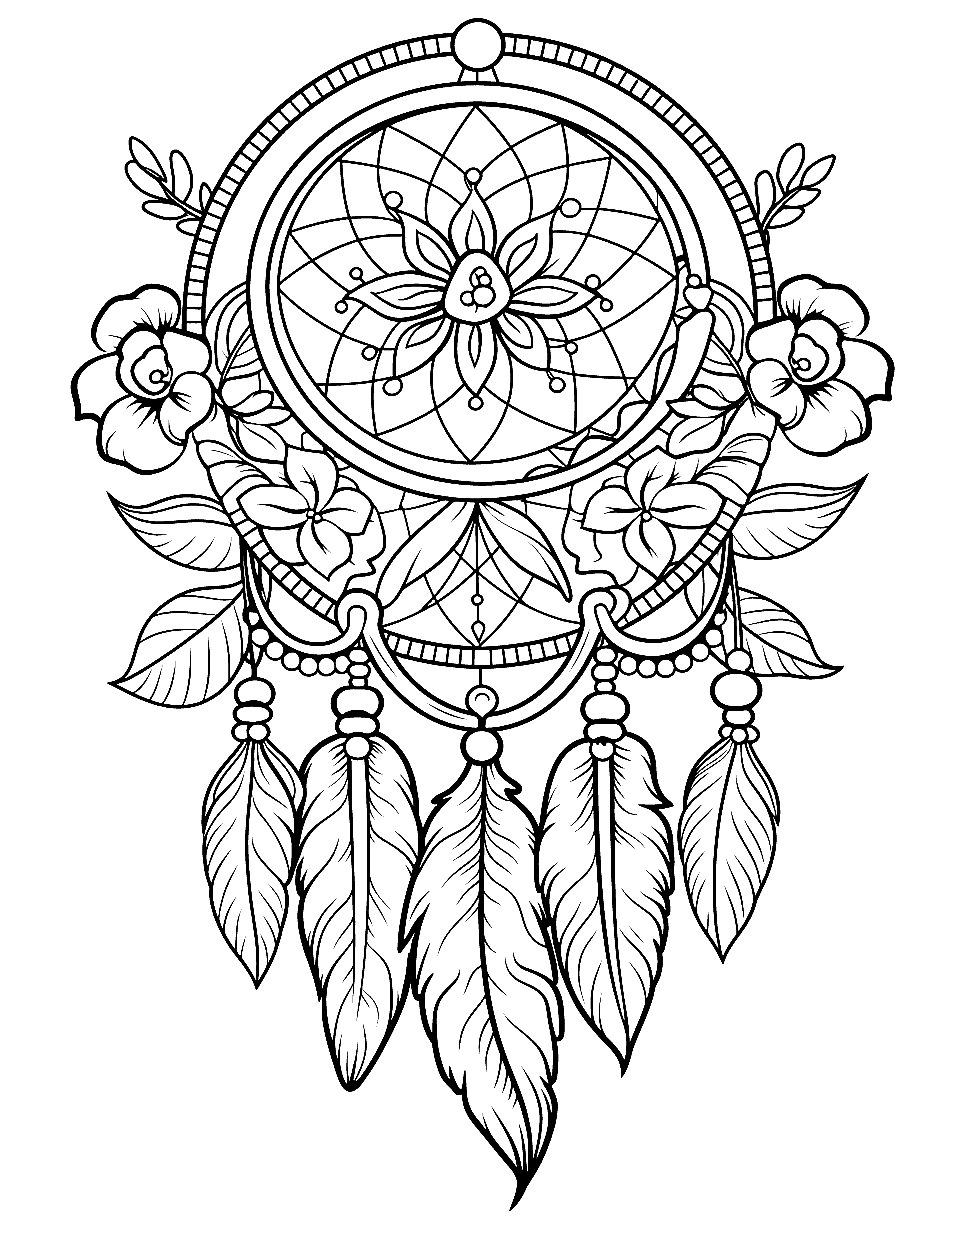 Dream Catcher in the Wild Adult Coloring Page - A detailed dream catcher for adults to color in.